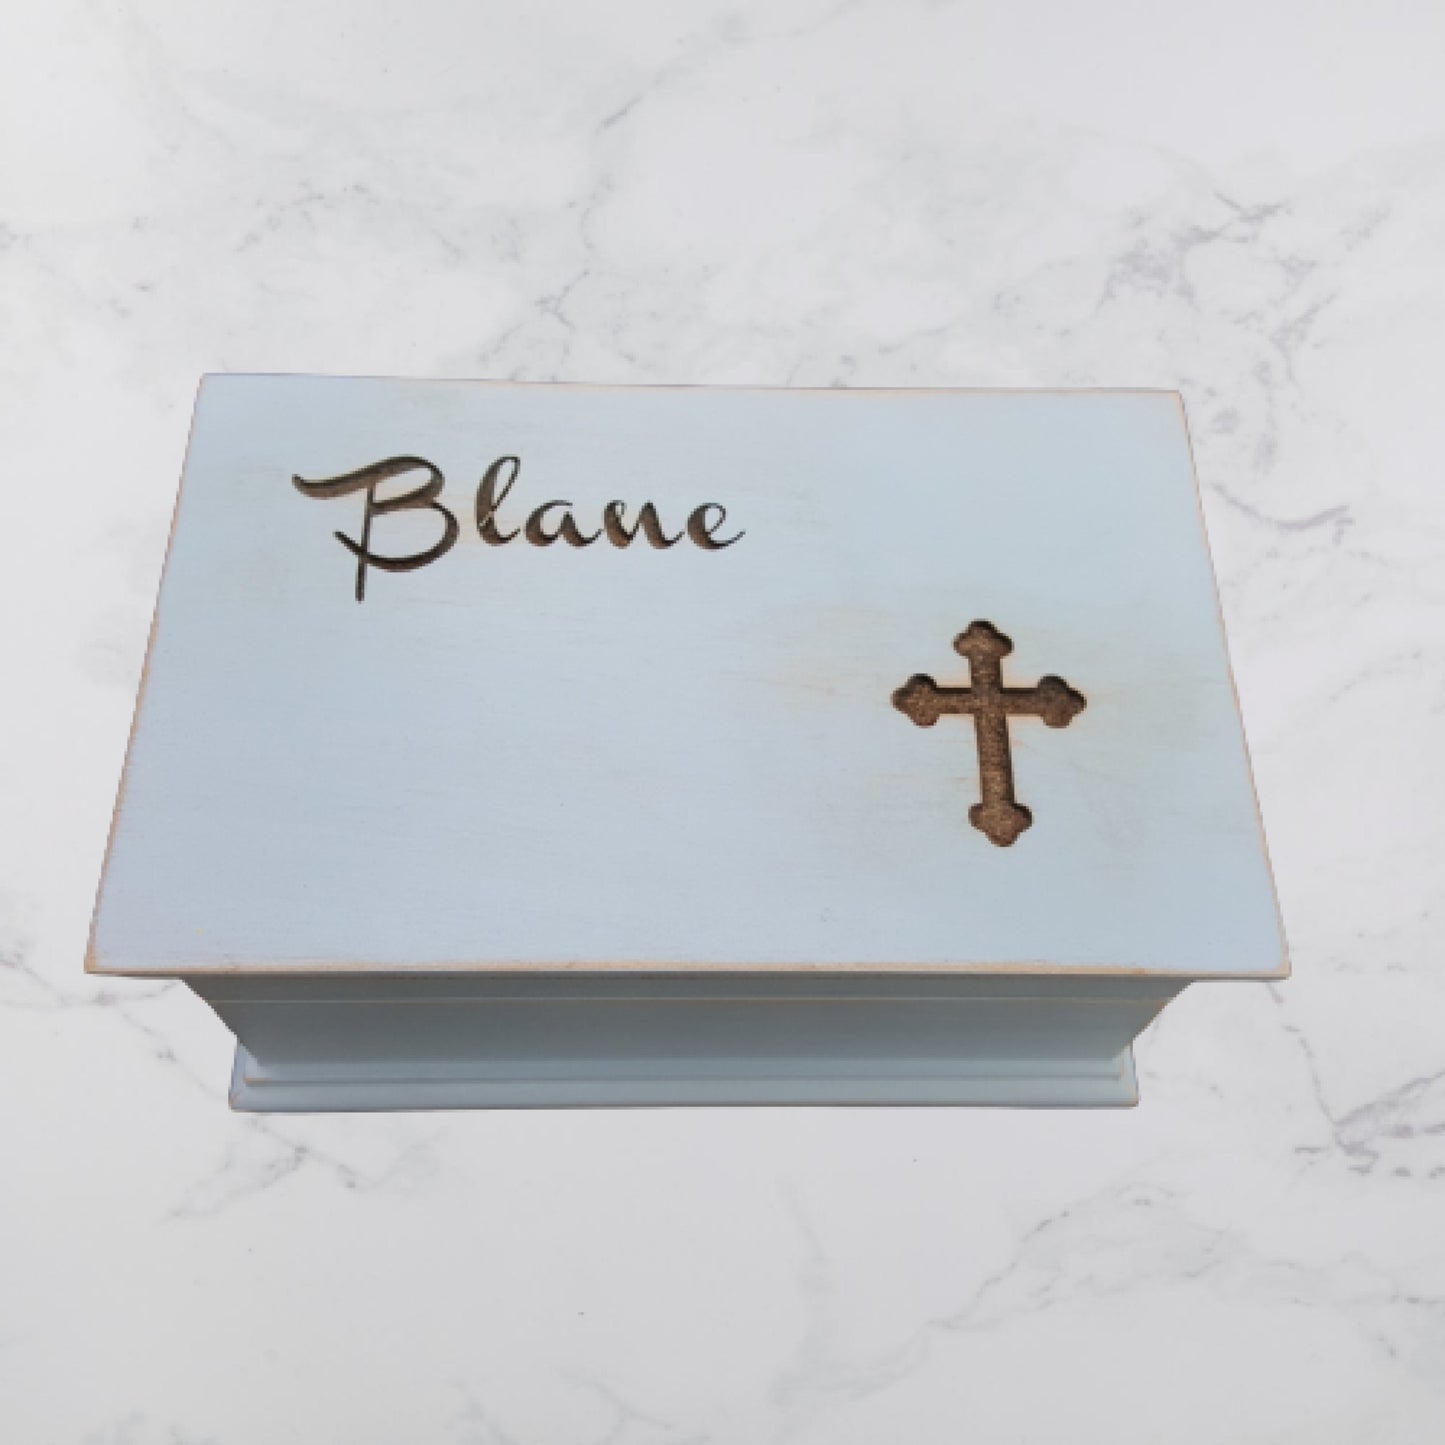 Personalized Christening box with name and cross on top with built in music player